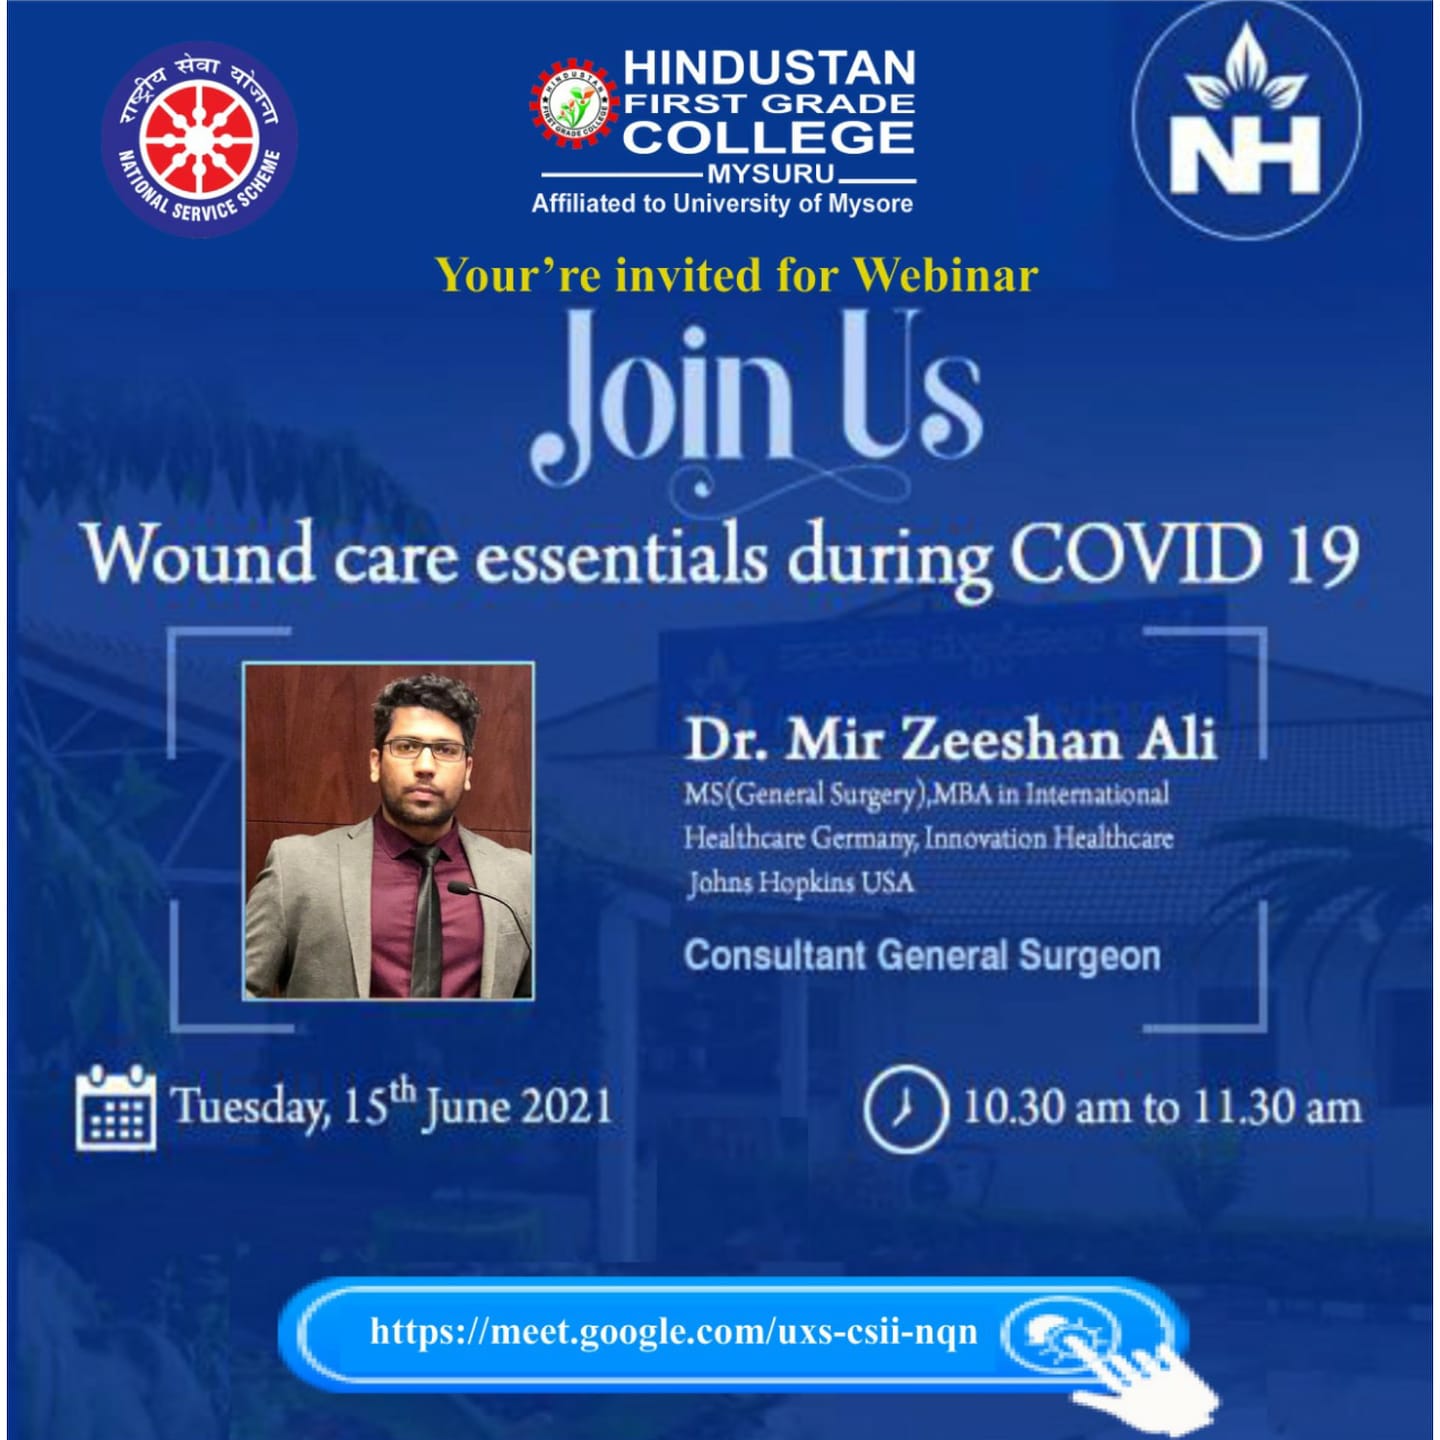 WEBINAR ON “WOUND CARE ESSENTIALS DURING COVID-19”